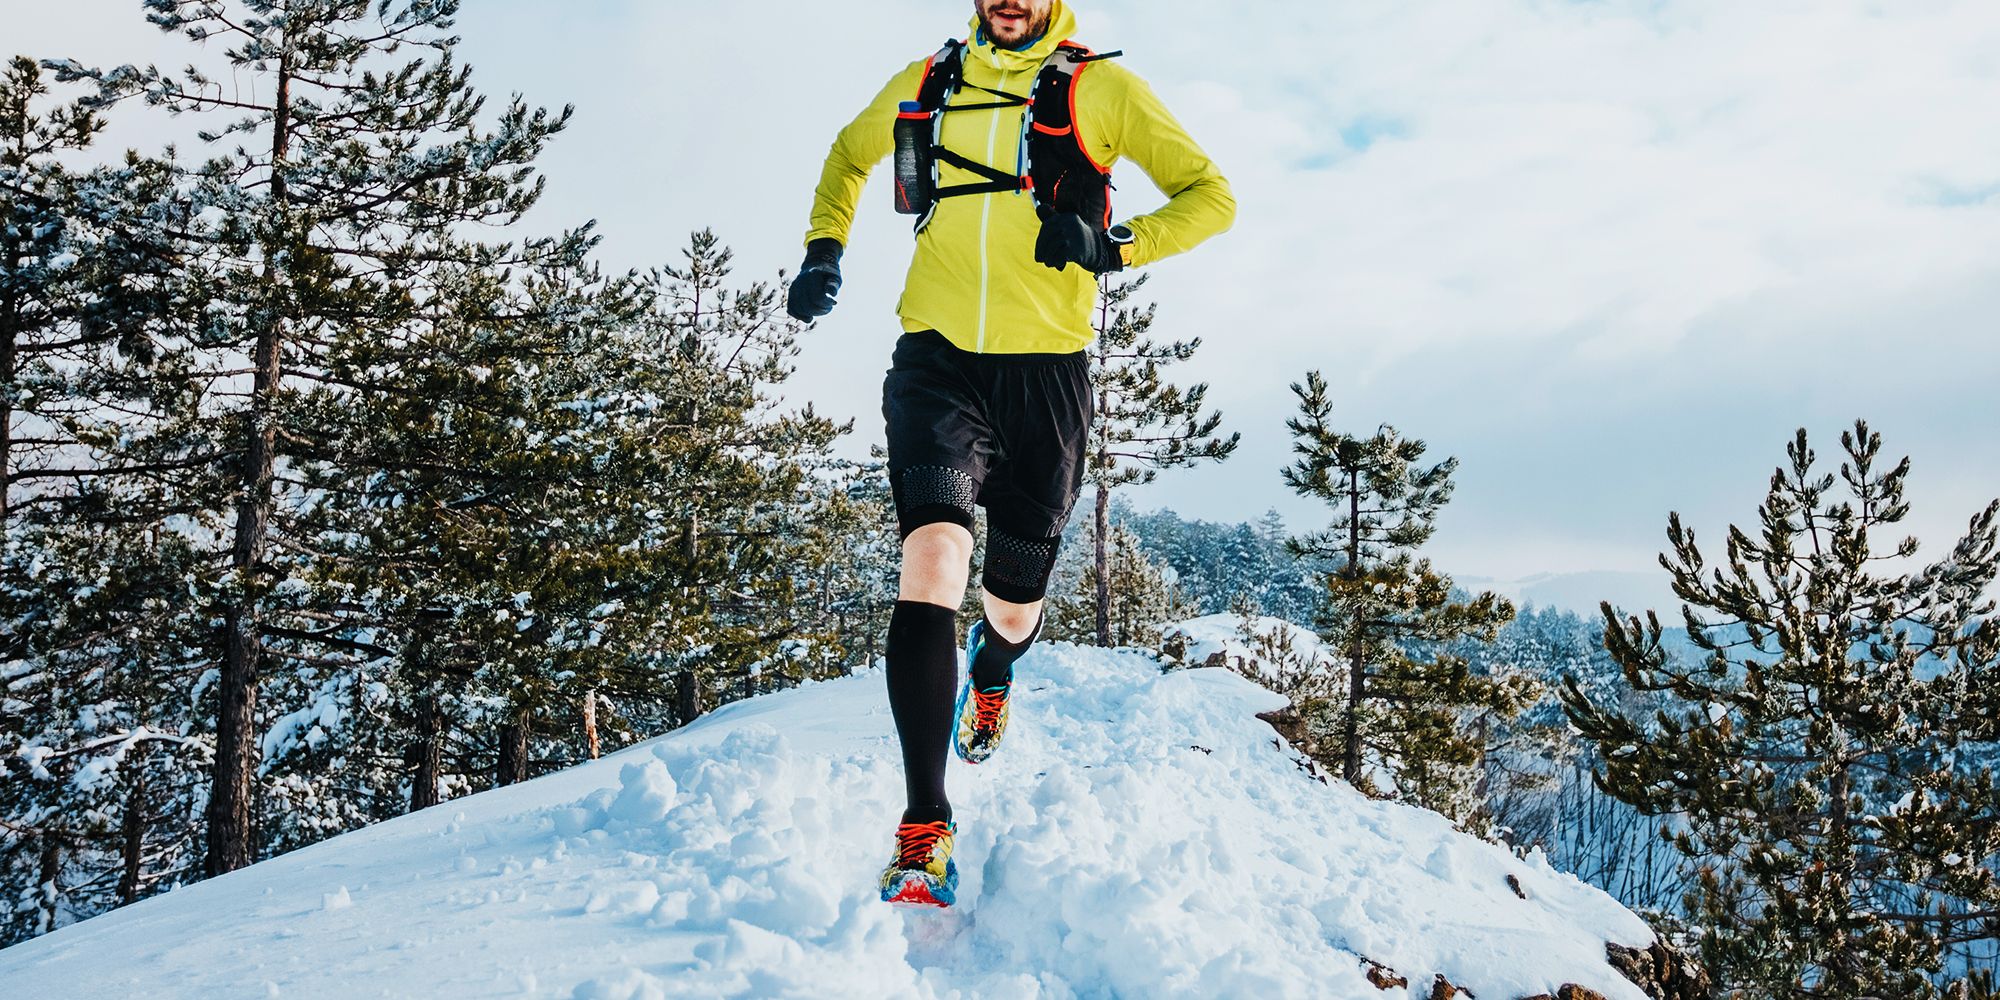 cold weather trail running shoes